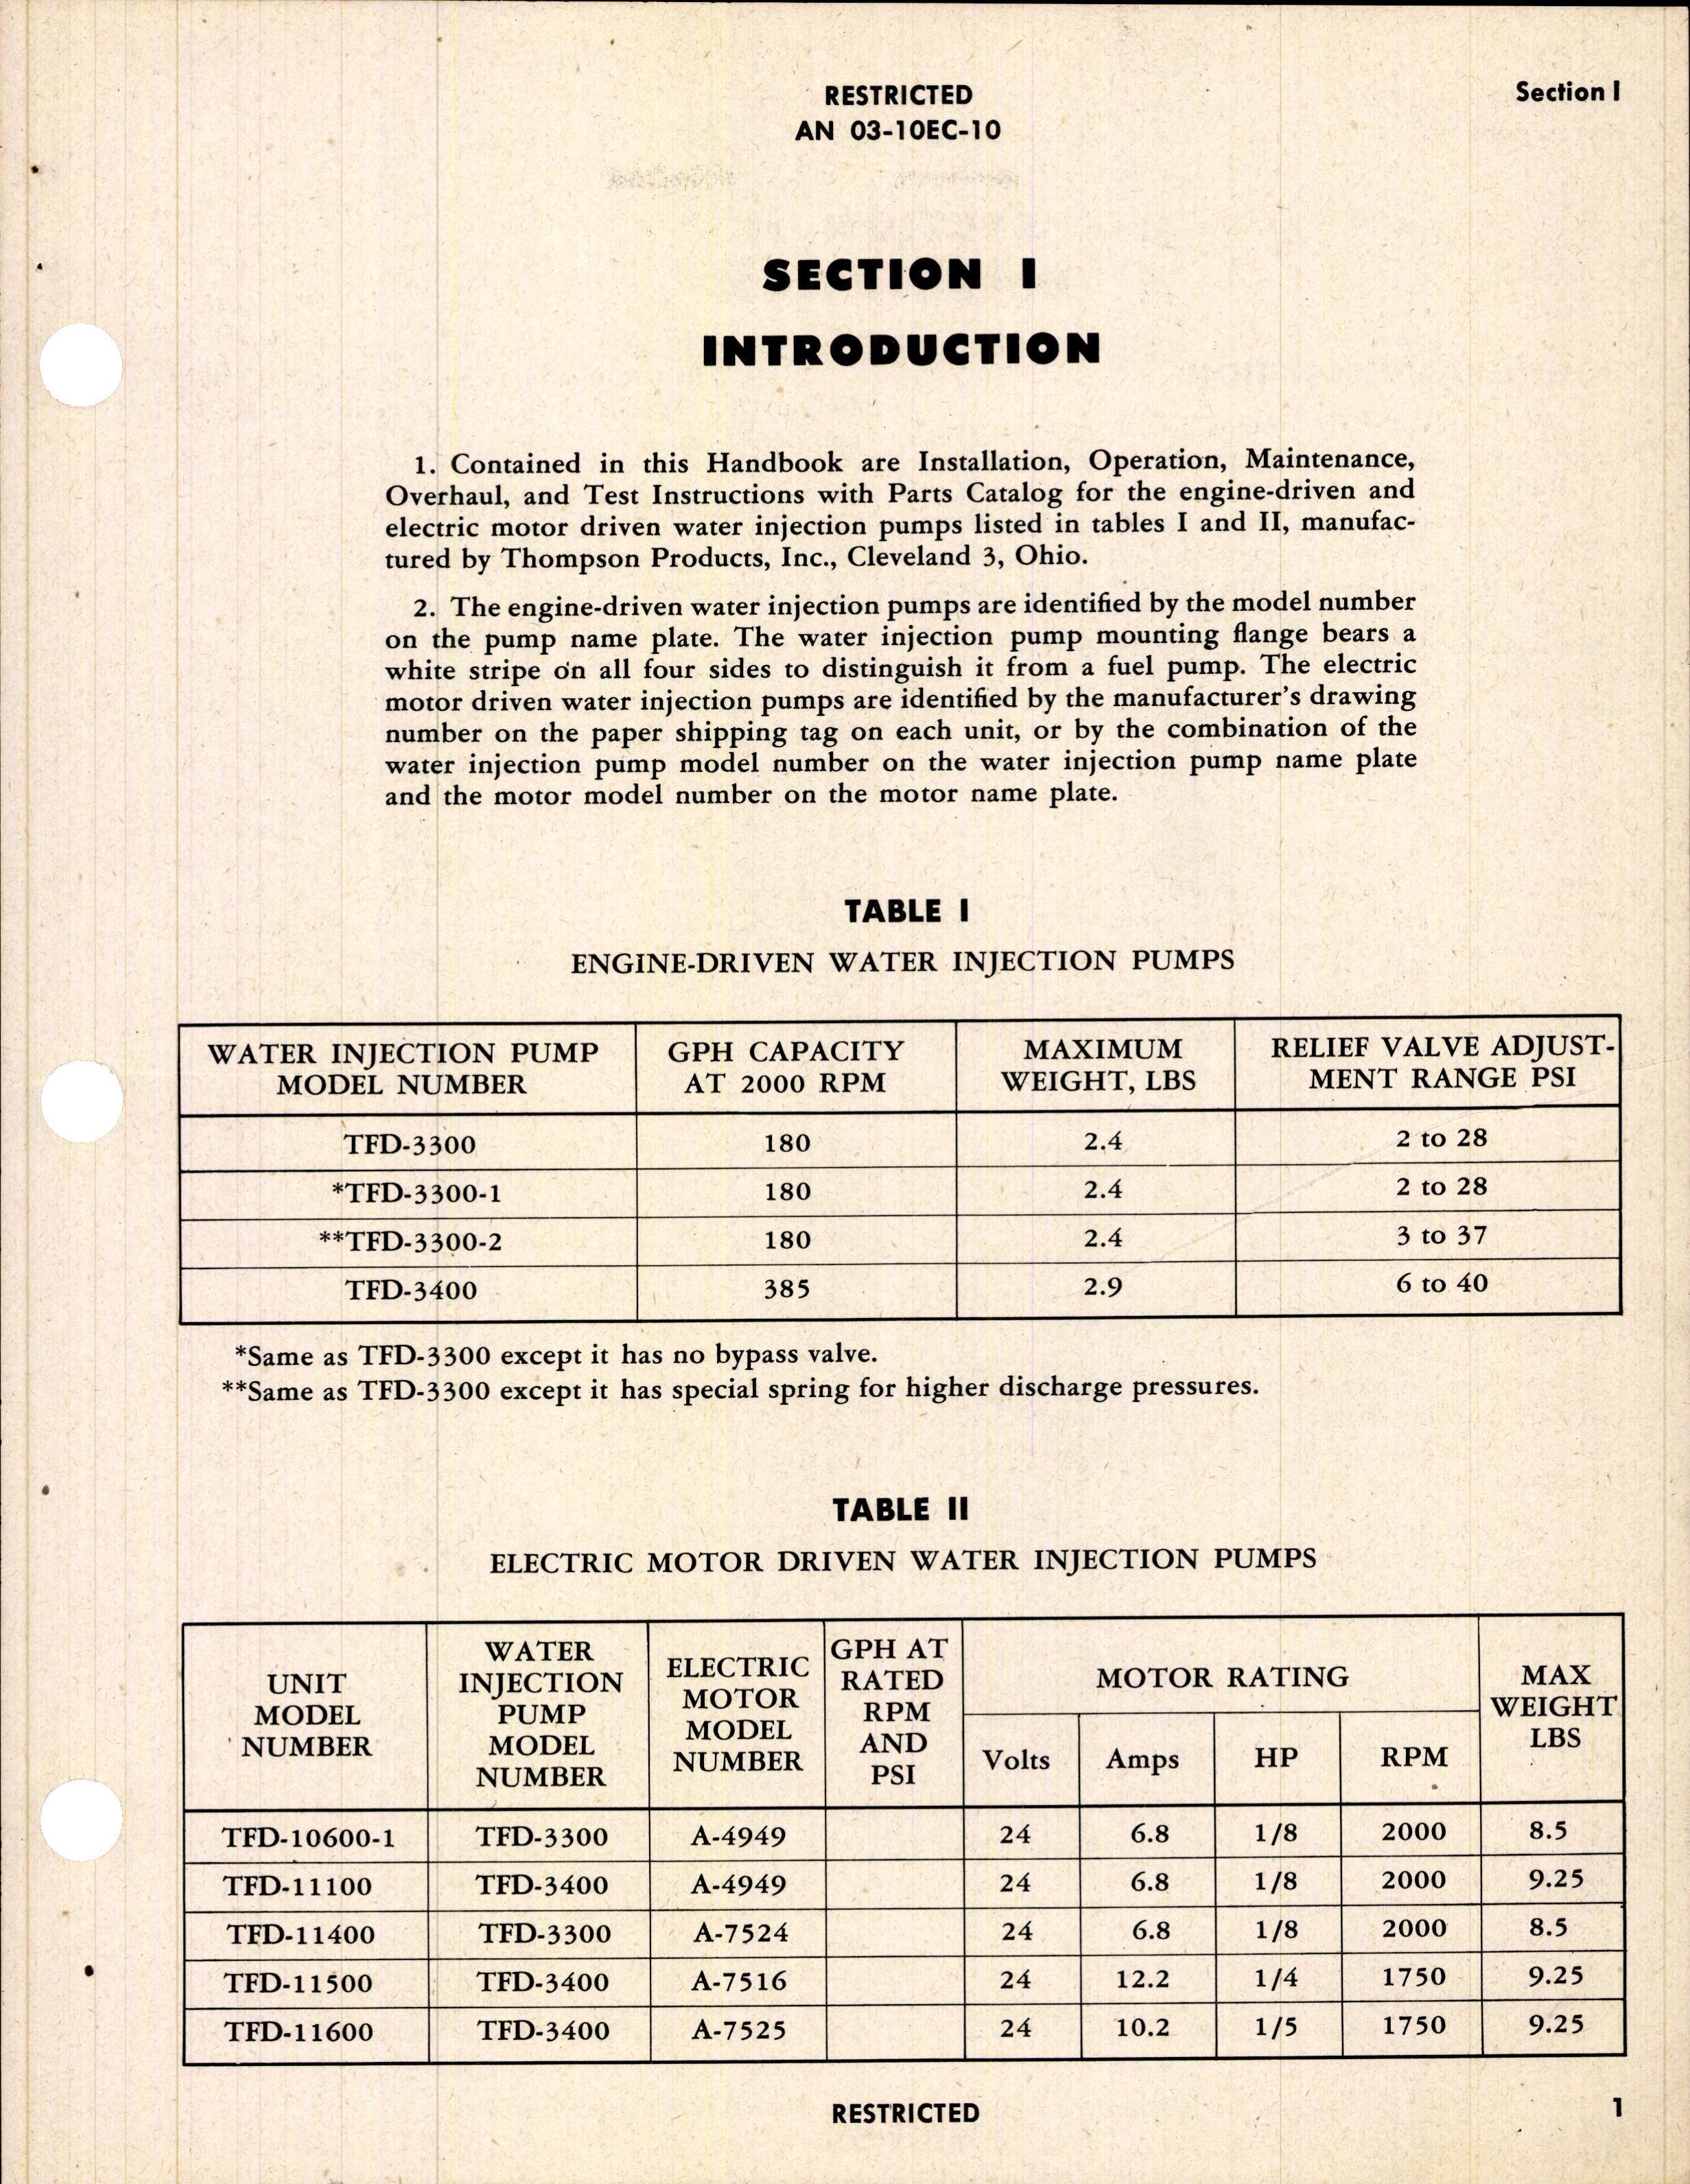 Sample page 5 from AirCorps Library document: Operation, Service, & Overhaul Instructions with Parts Catalog for Engine-Driven & Electric Motor Driven Water Injection Pumps